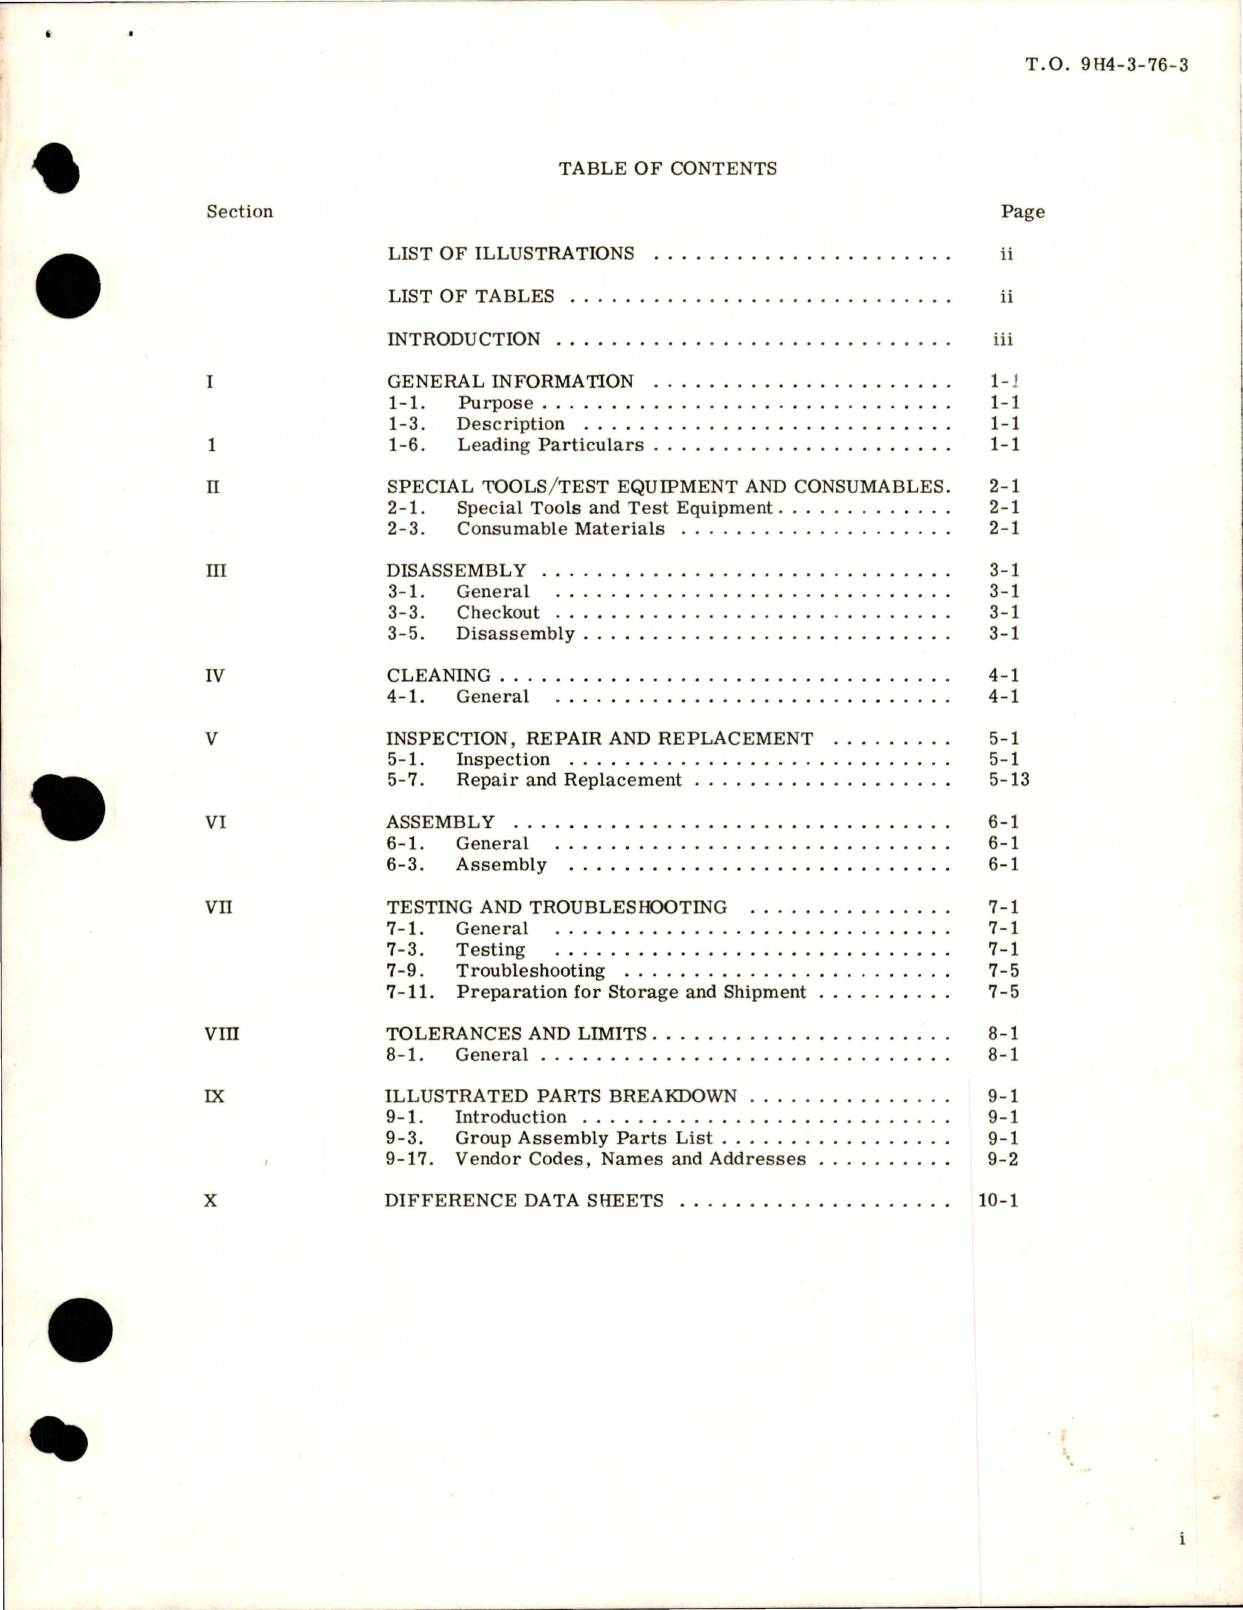 Sample page 5 from AirCorps Library document: Overhaul Instructions with Illustrated Parts for Electric Driven Hydraulic Motorpump Assembly - Part 378004 - Model MPEV3-032-4